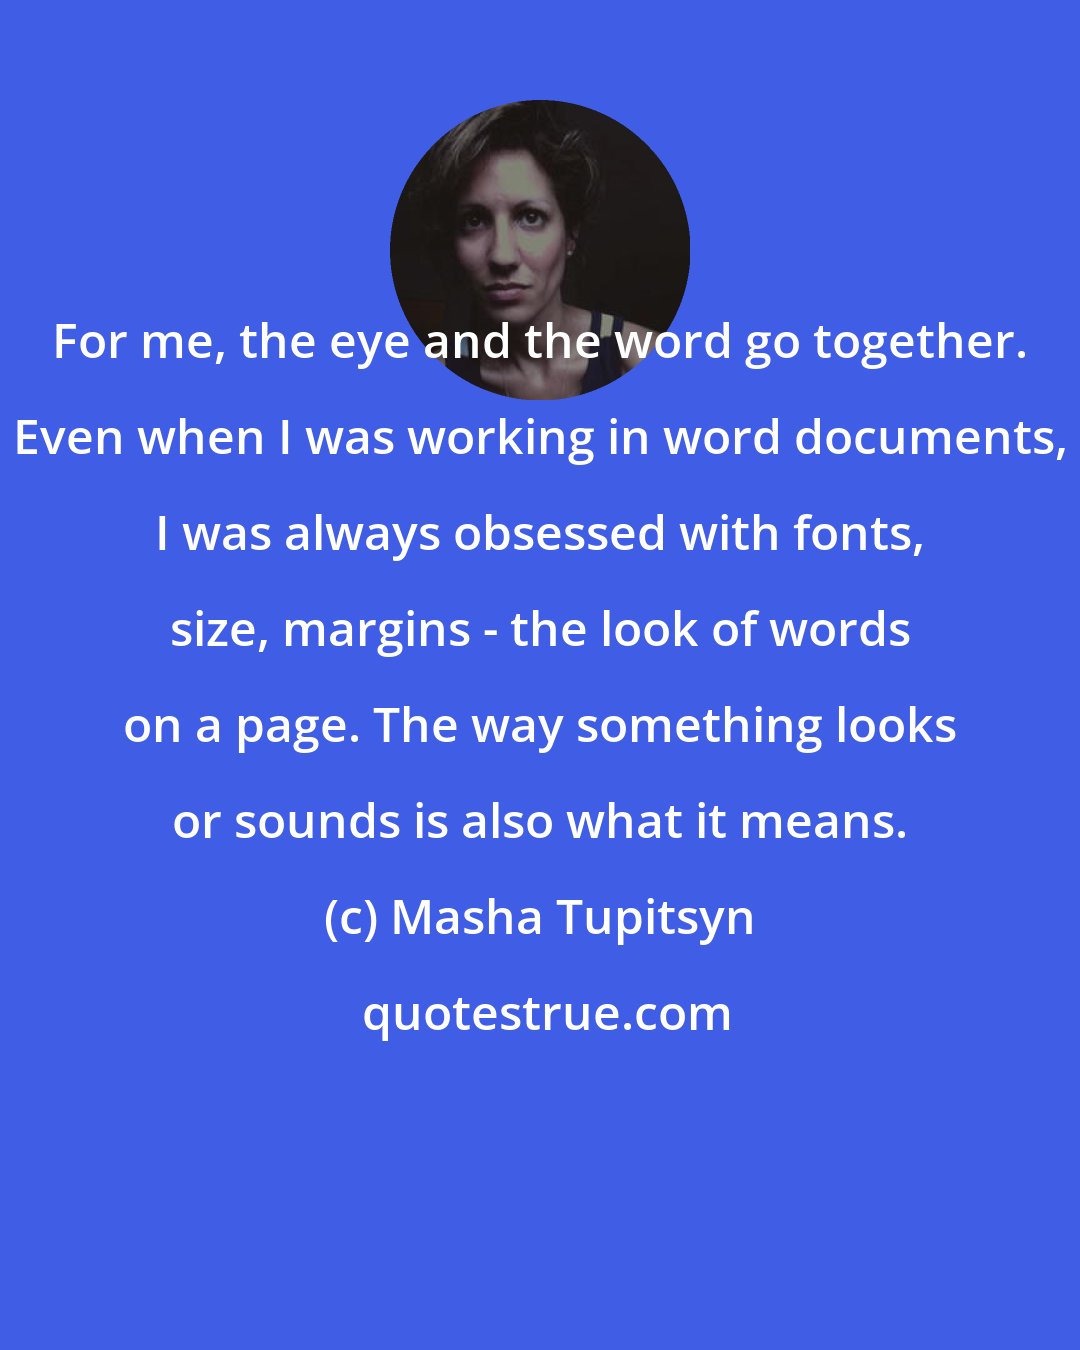 Masha Tupitsyn: For me, the eye and the word go together. Even when I was working in word documents, I was always obsessed with fonts, size, margins - the look of words on a page. The way something looks or sounds is also what it means.